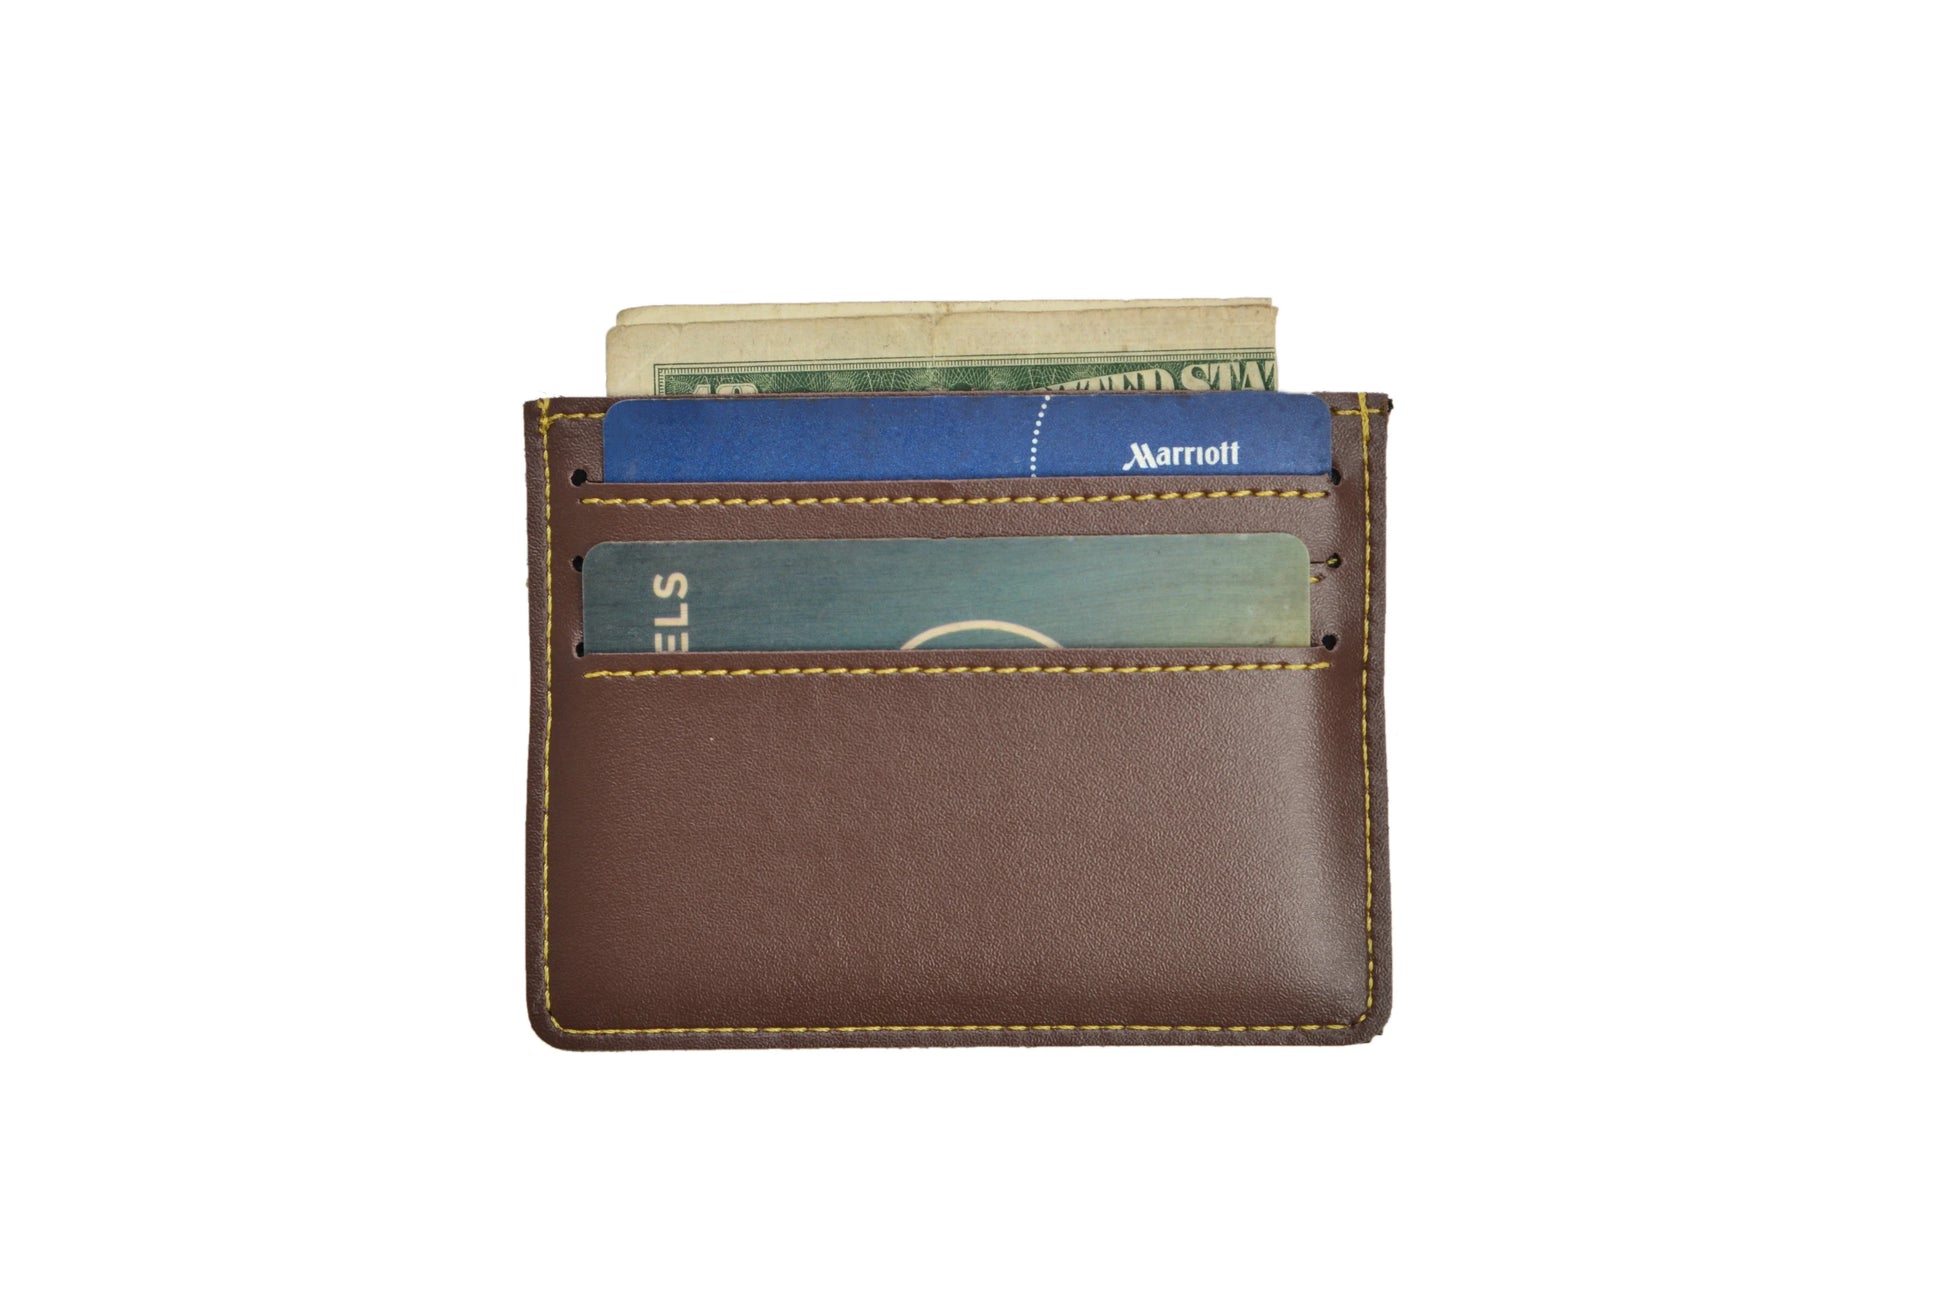 Our unisex card wallet is the perfect accessory for those who want to keep their cards organized and easily accessible.